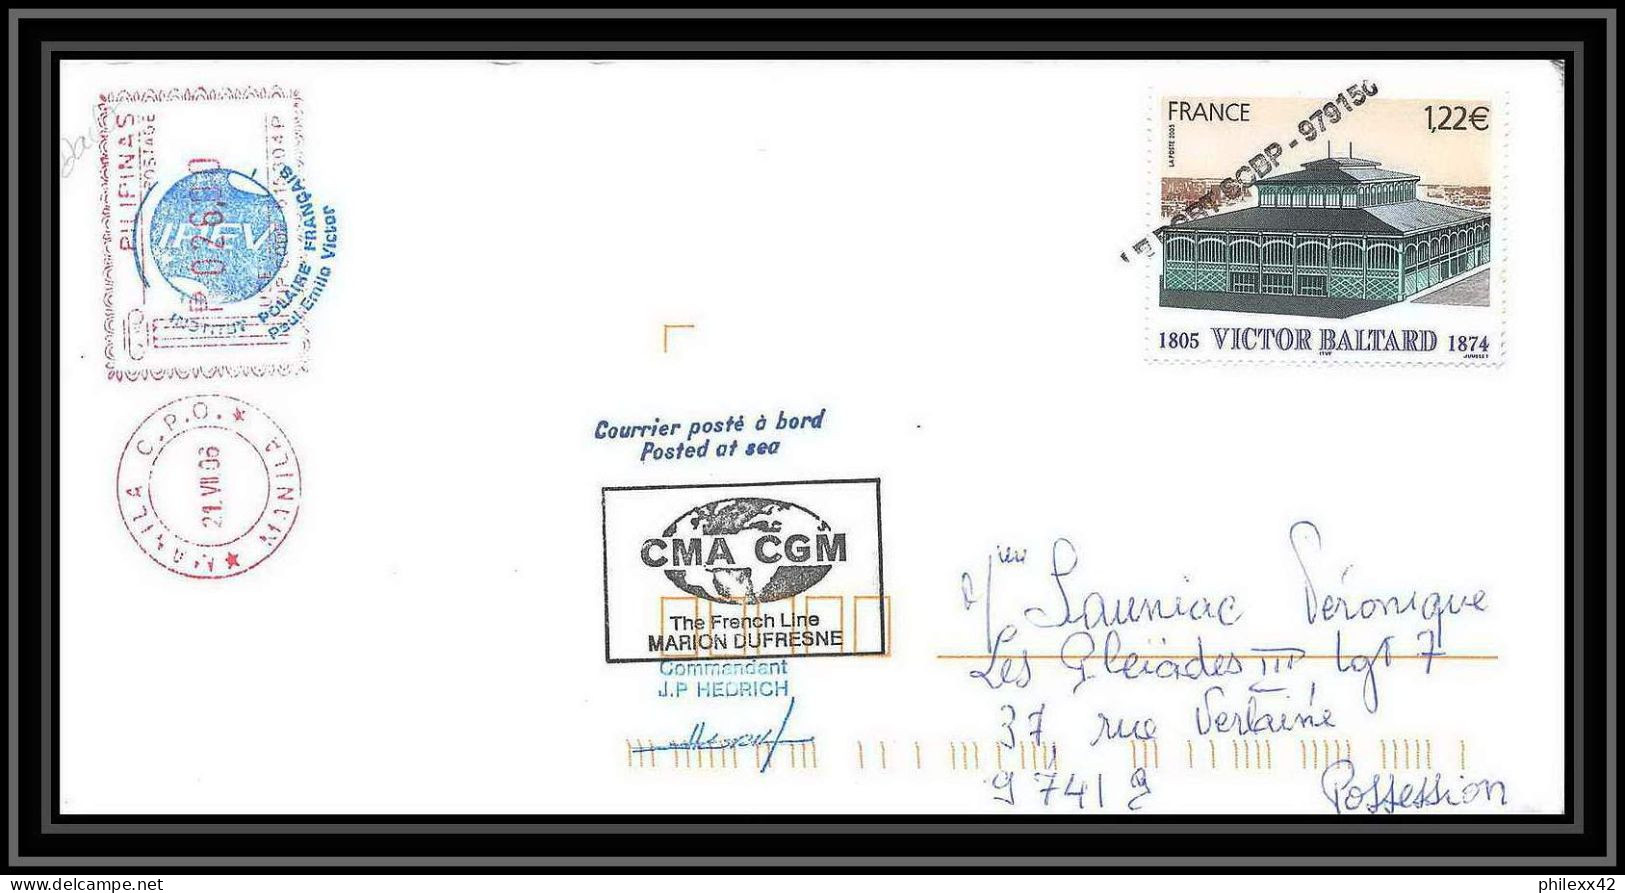 2591 ANTARCTIC Taaf Philippines Pilipinas Mixte Lettre Cover Dufresne 2 Signé Signed Md 155 Marco Polo 2 2006 Papillons - Expediciones Antárticas